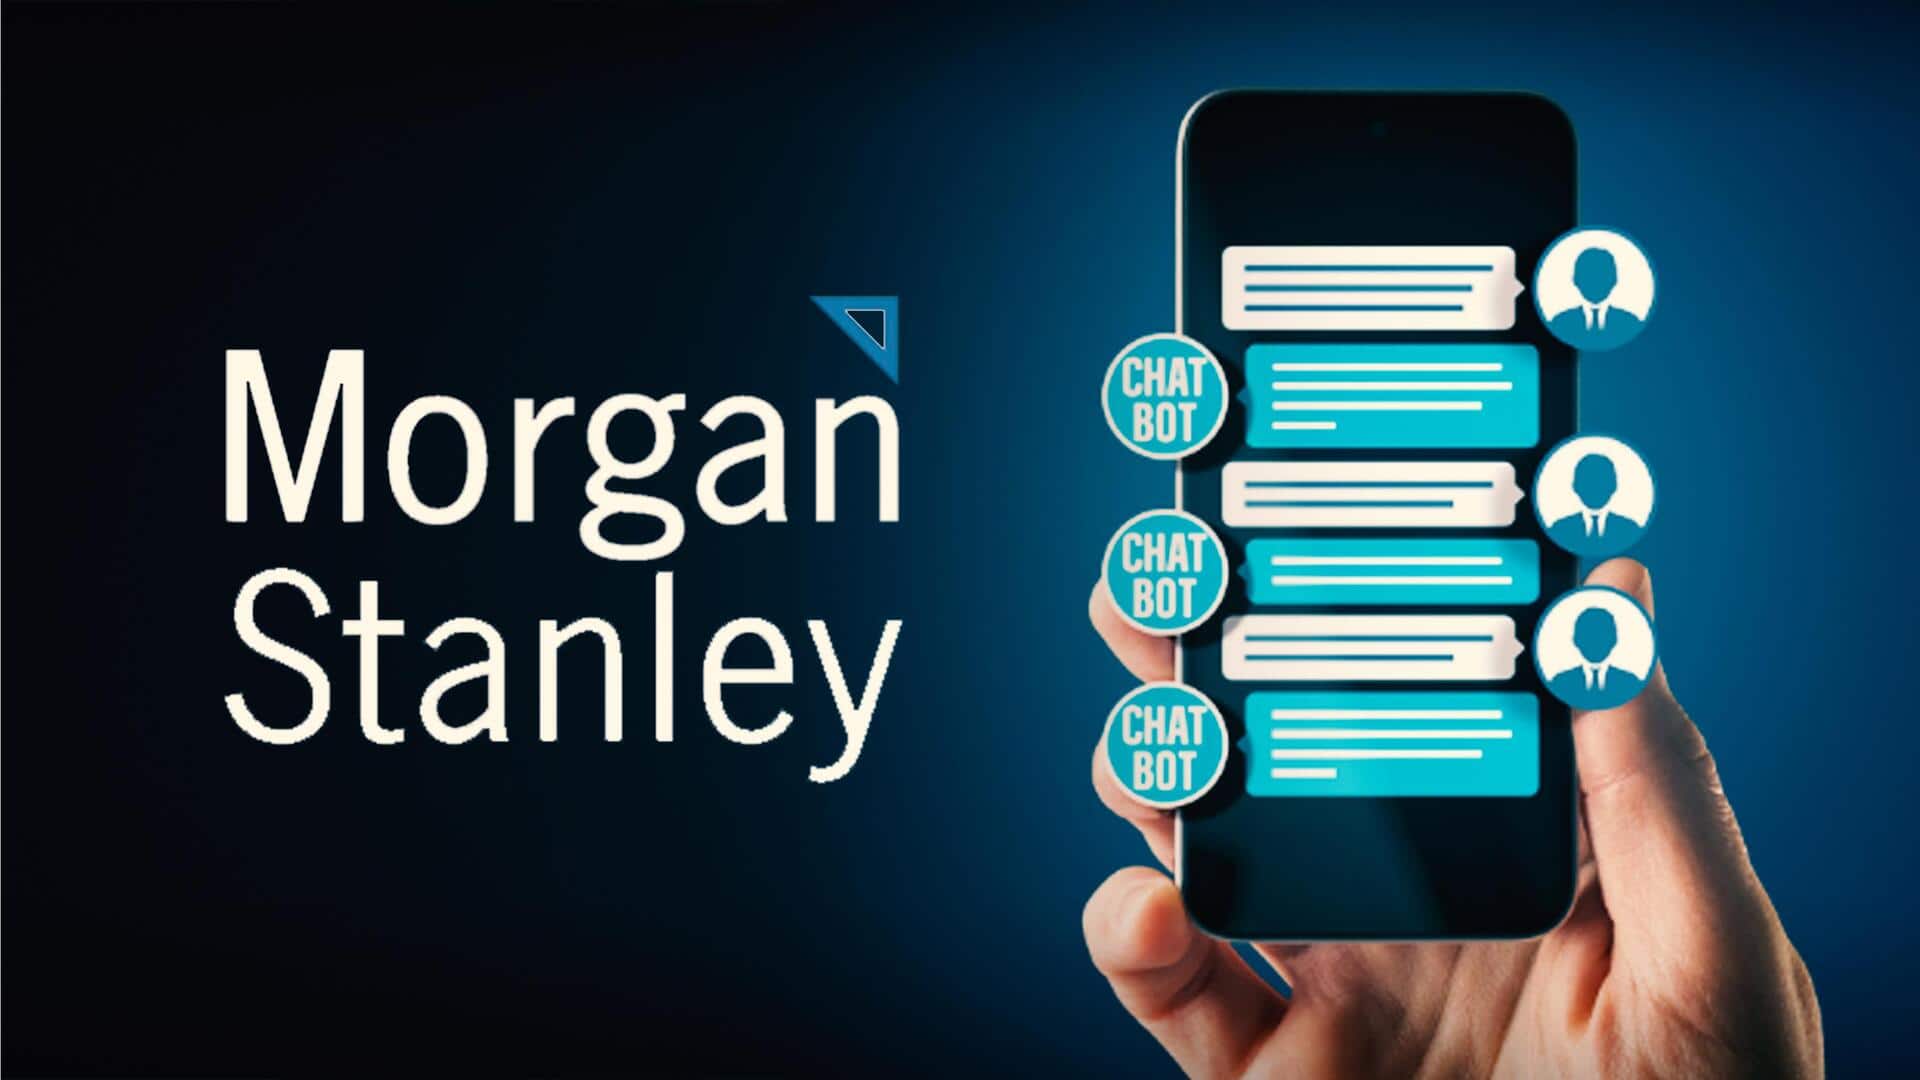 Morgan Stanley to soon unveil its AI chatbot for bankers